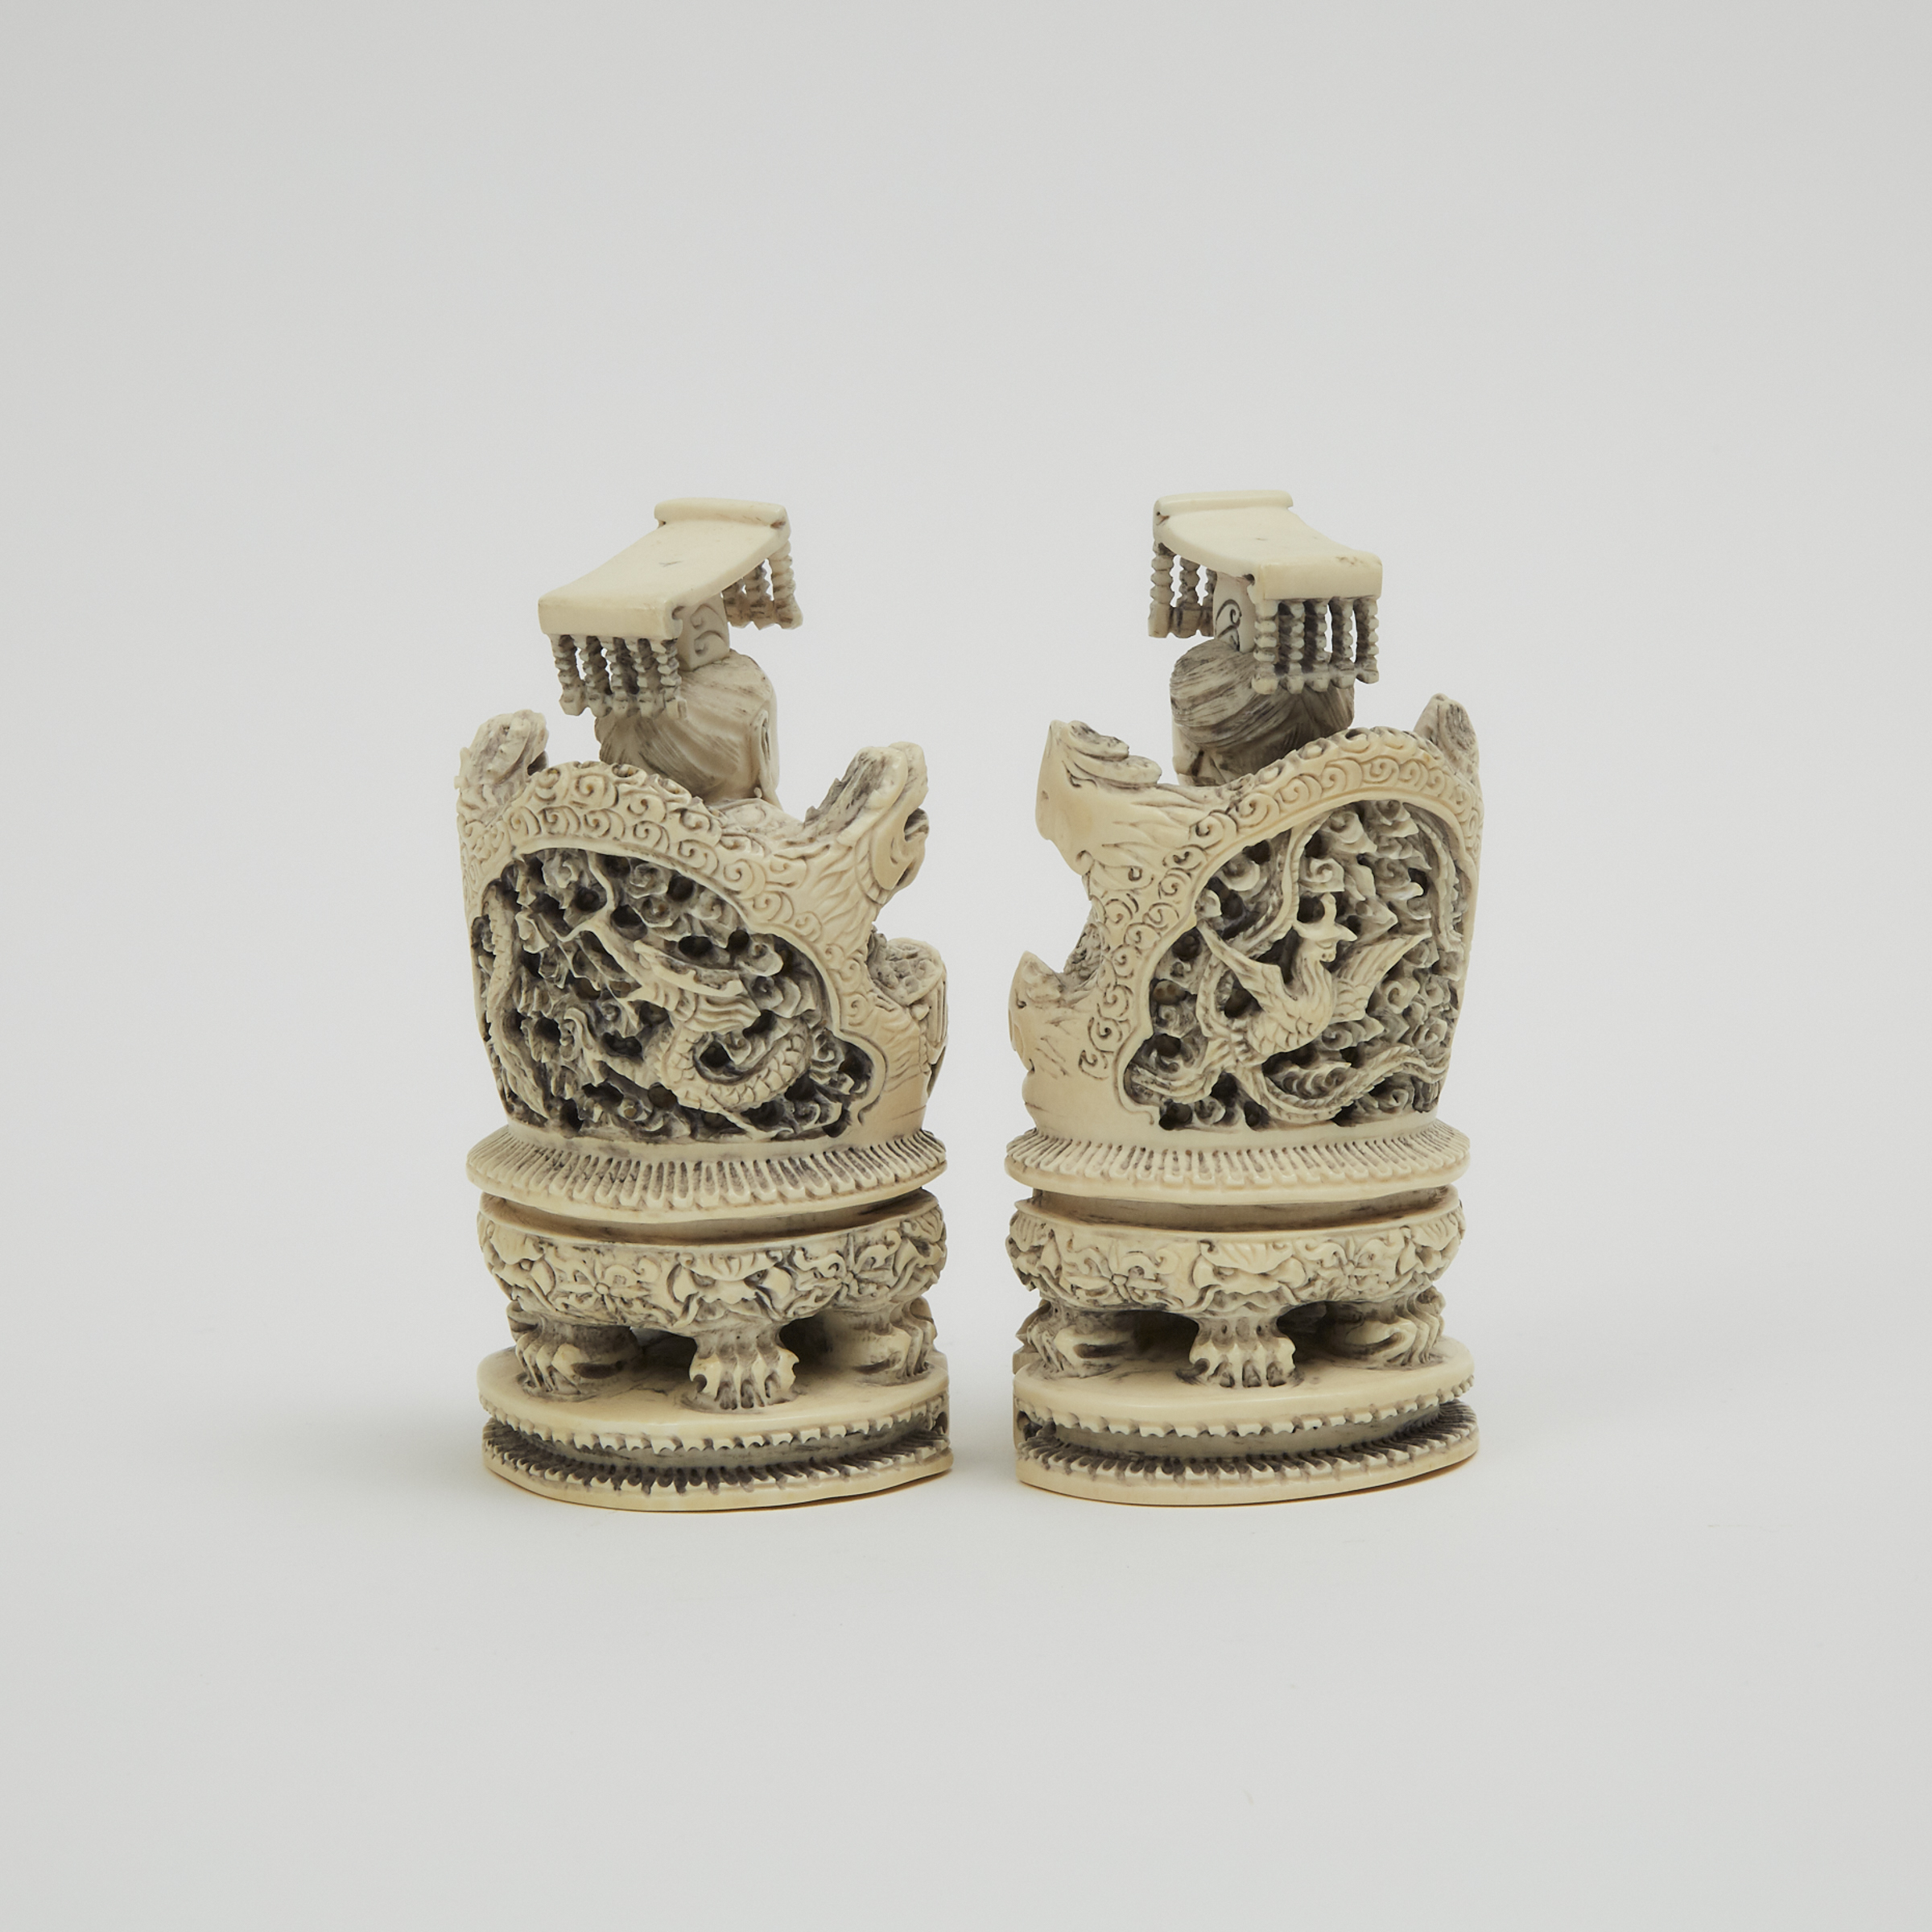 A Chinese Ivory Seated Emperor and Empress Pair, Circa 1940